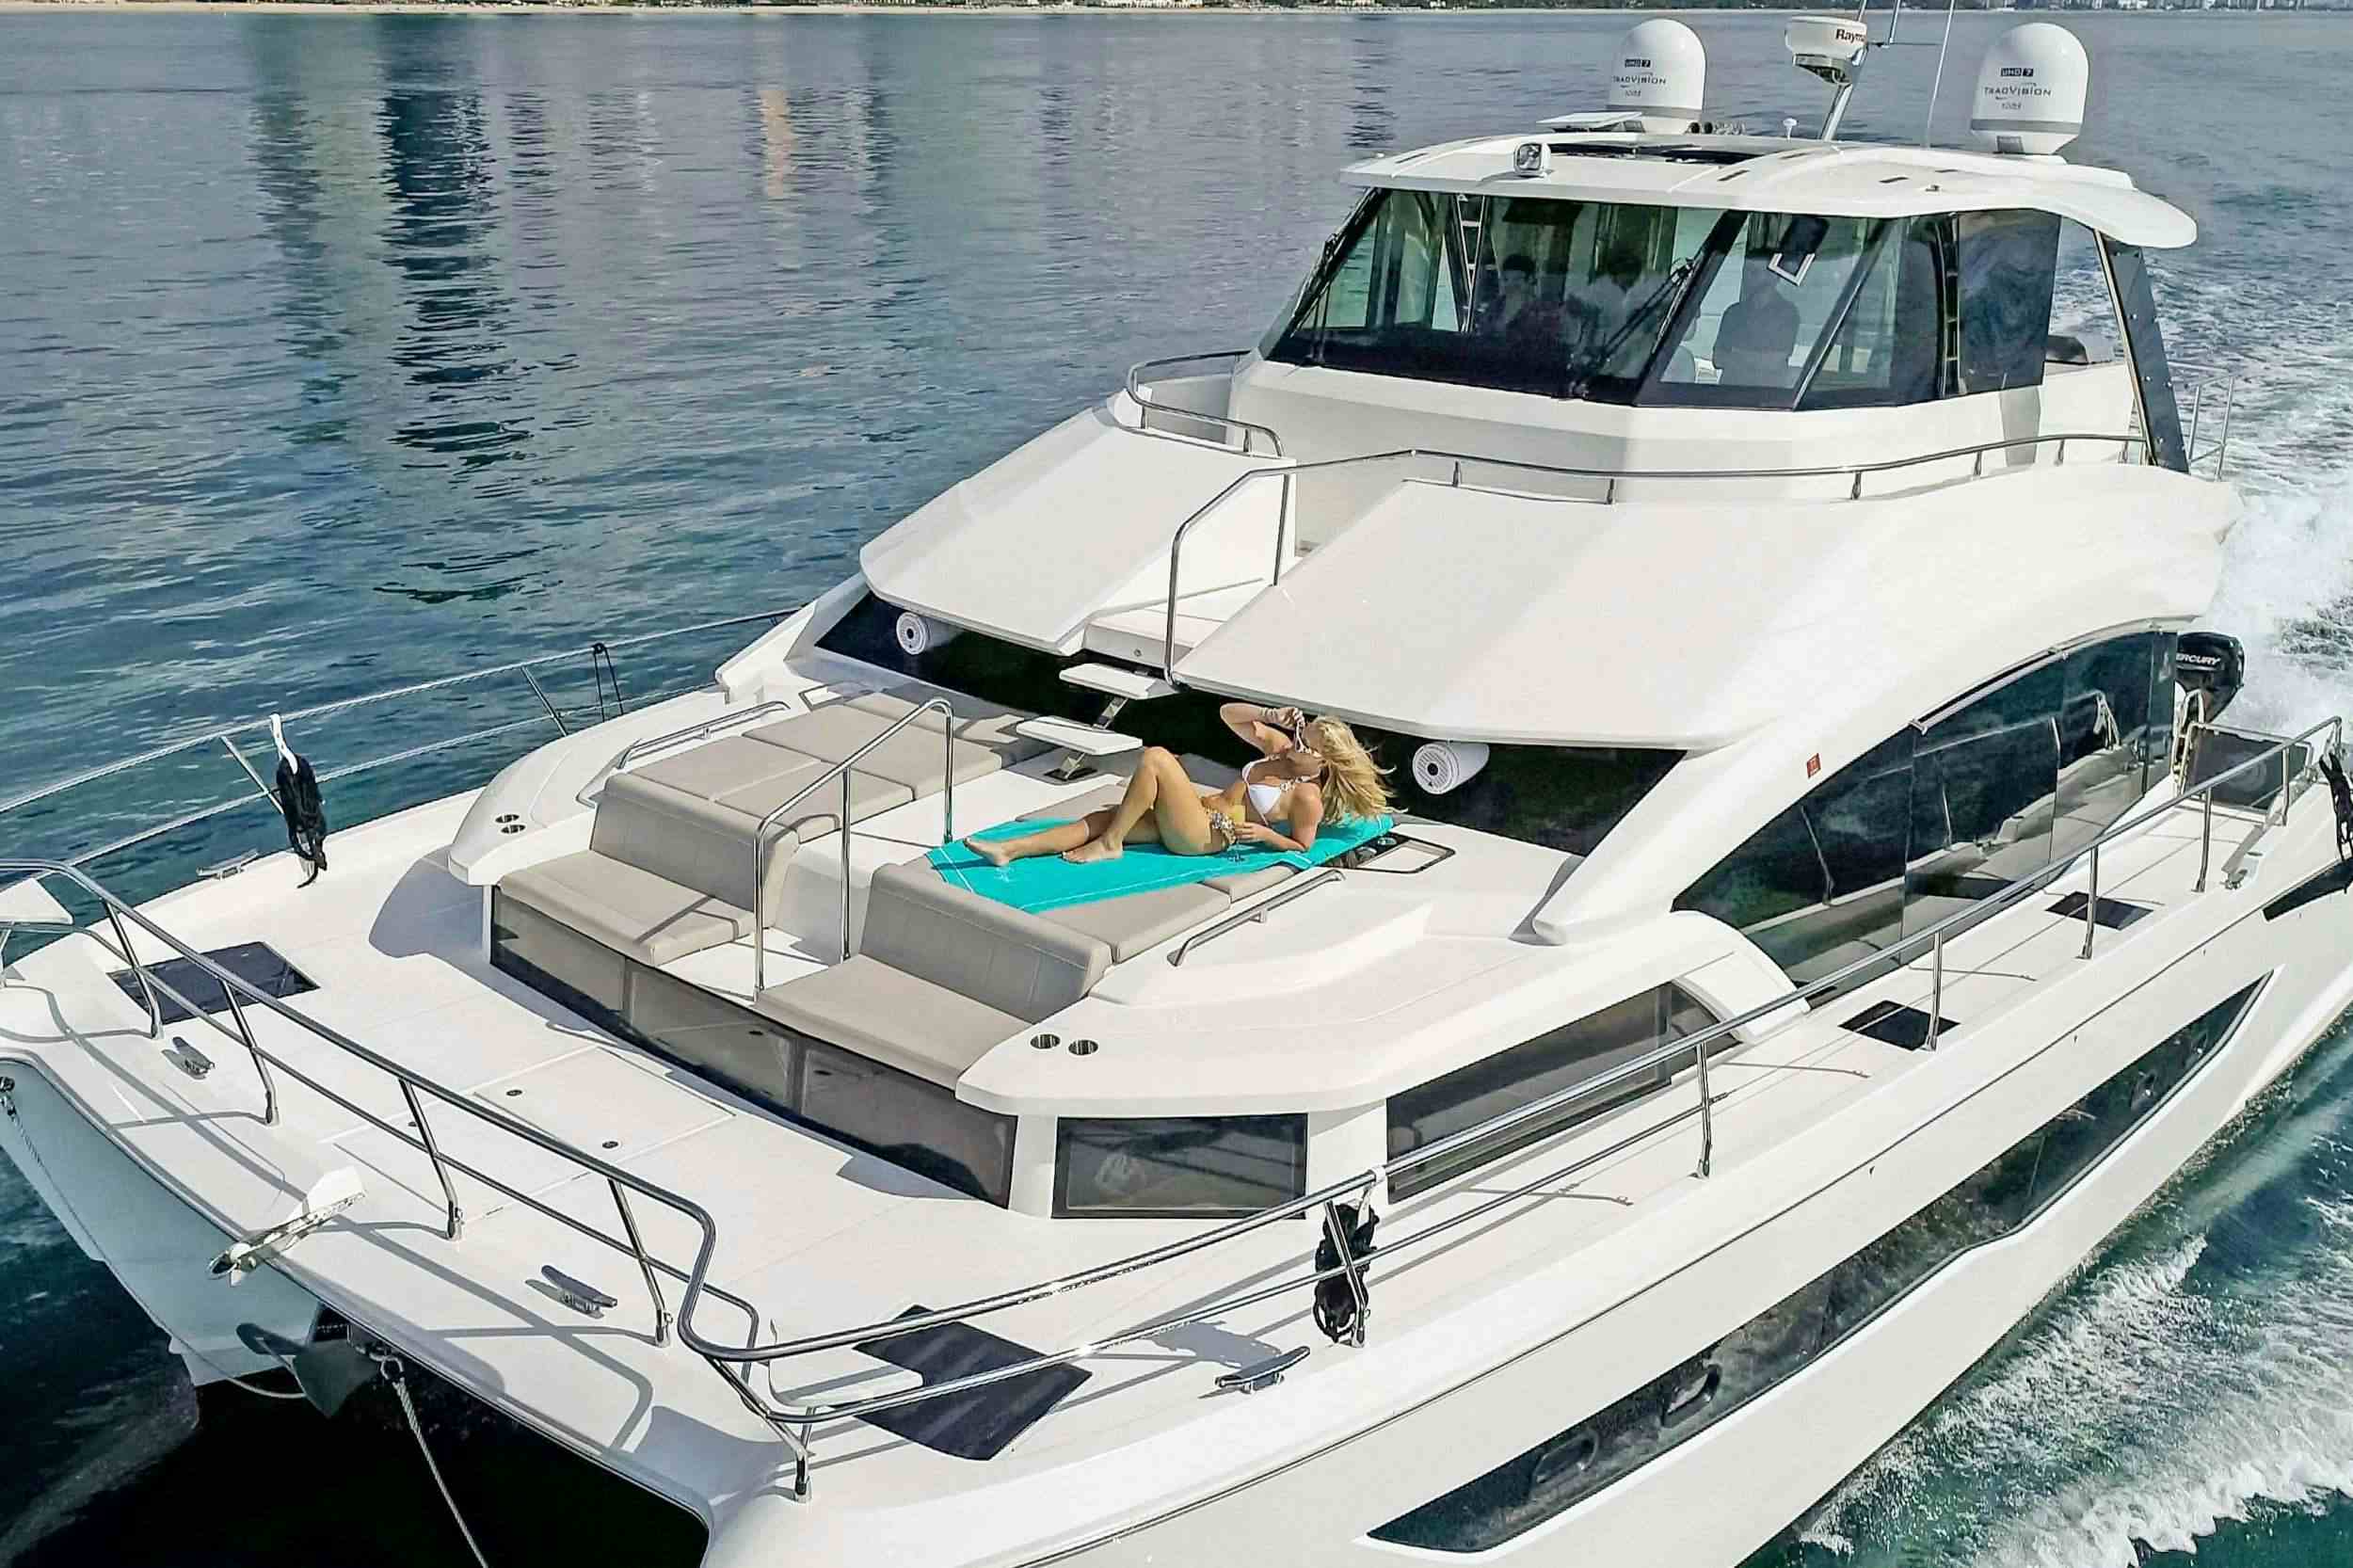 Sea Angel - Yacht Charter Florida & Boat hire in Florida 1